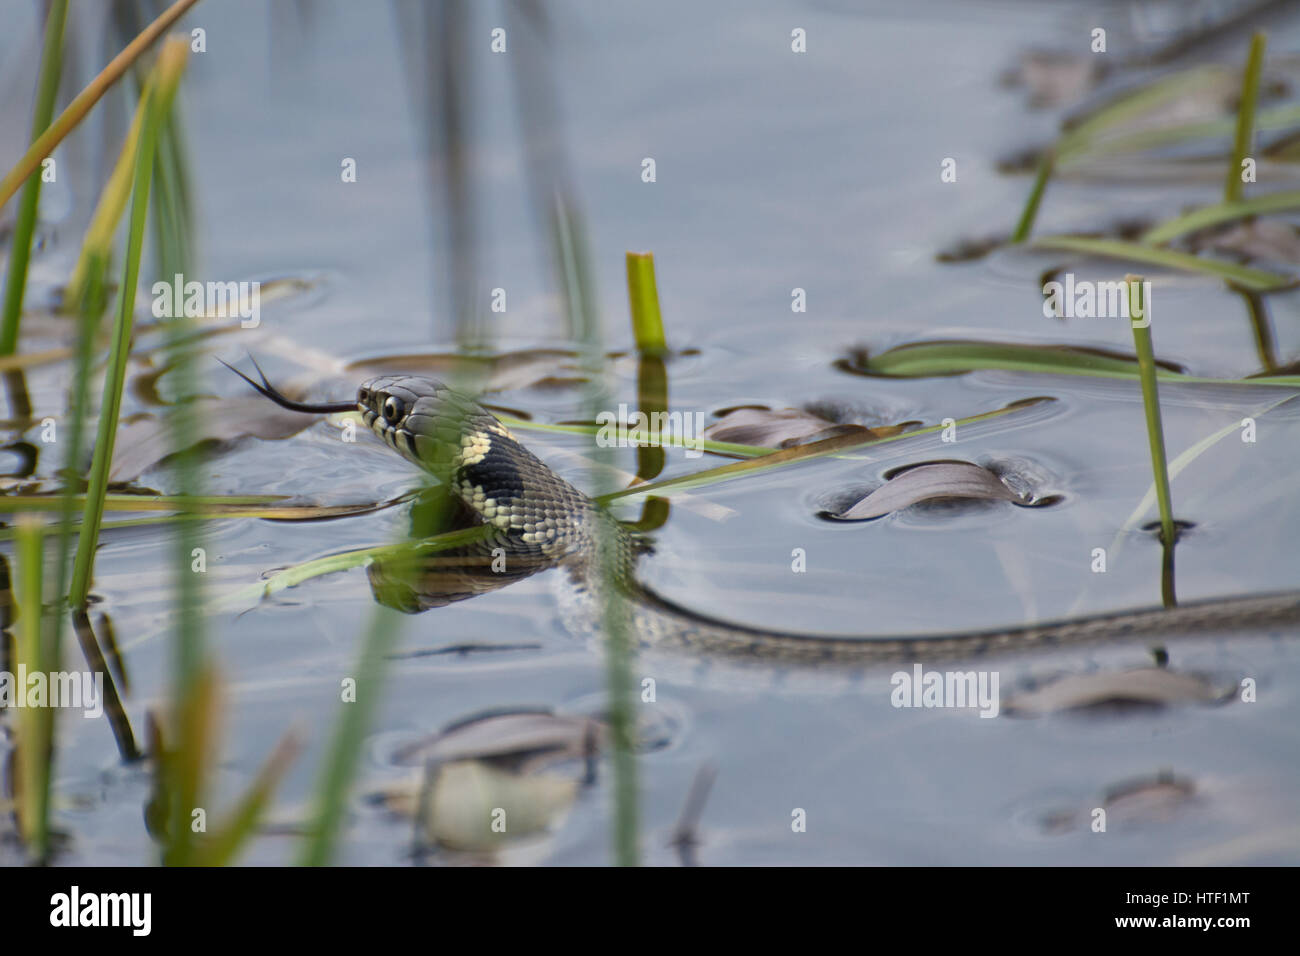 Grass snake (Natrix helvetica) swimming in a pond with tongue flicking (chemosensing) Stock Photo